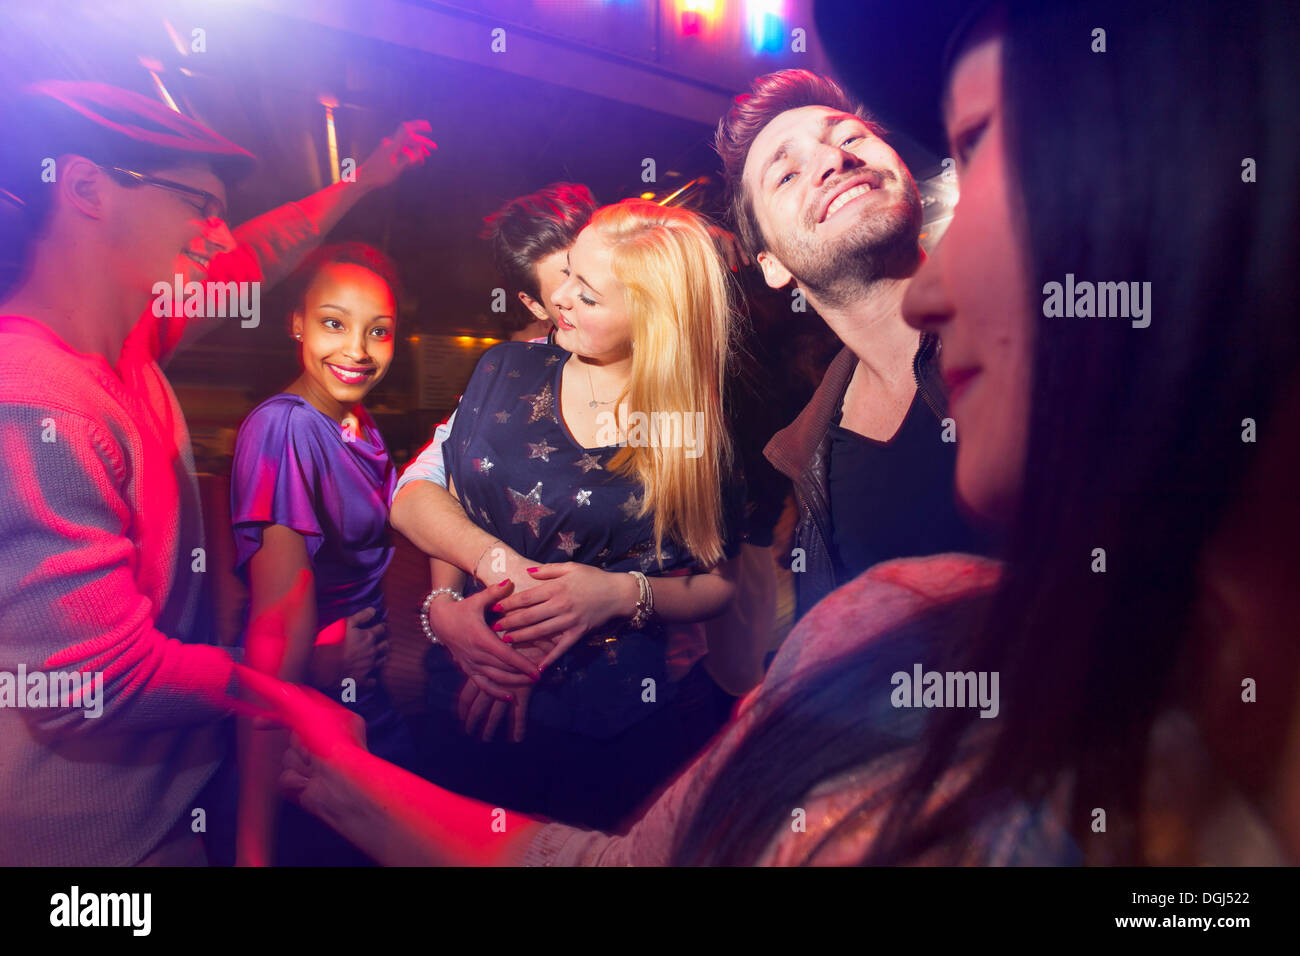 Group of people at party, man kissing woman's neck Stock Photo